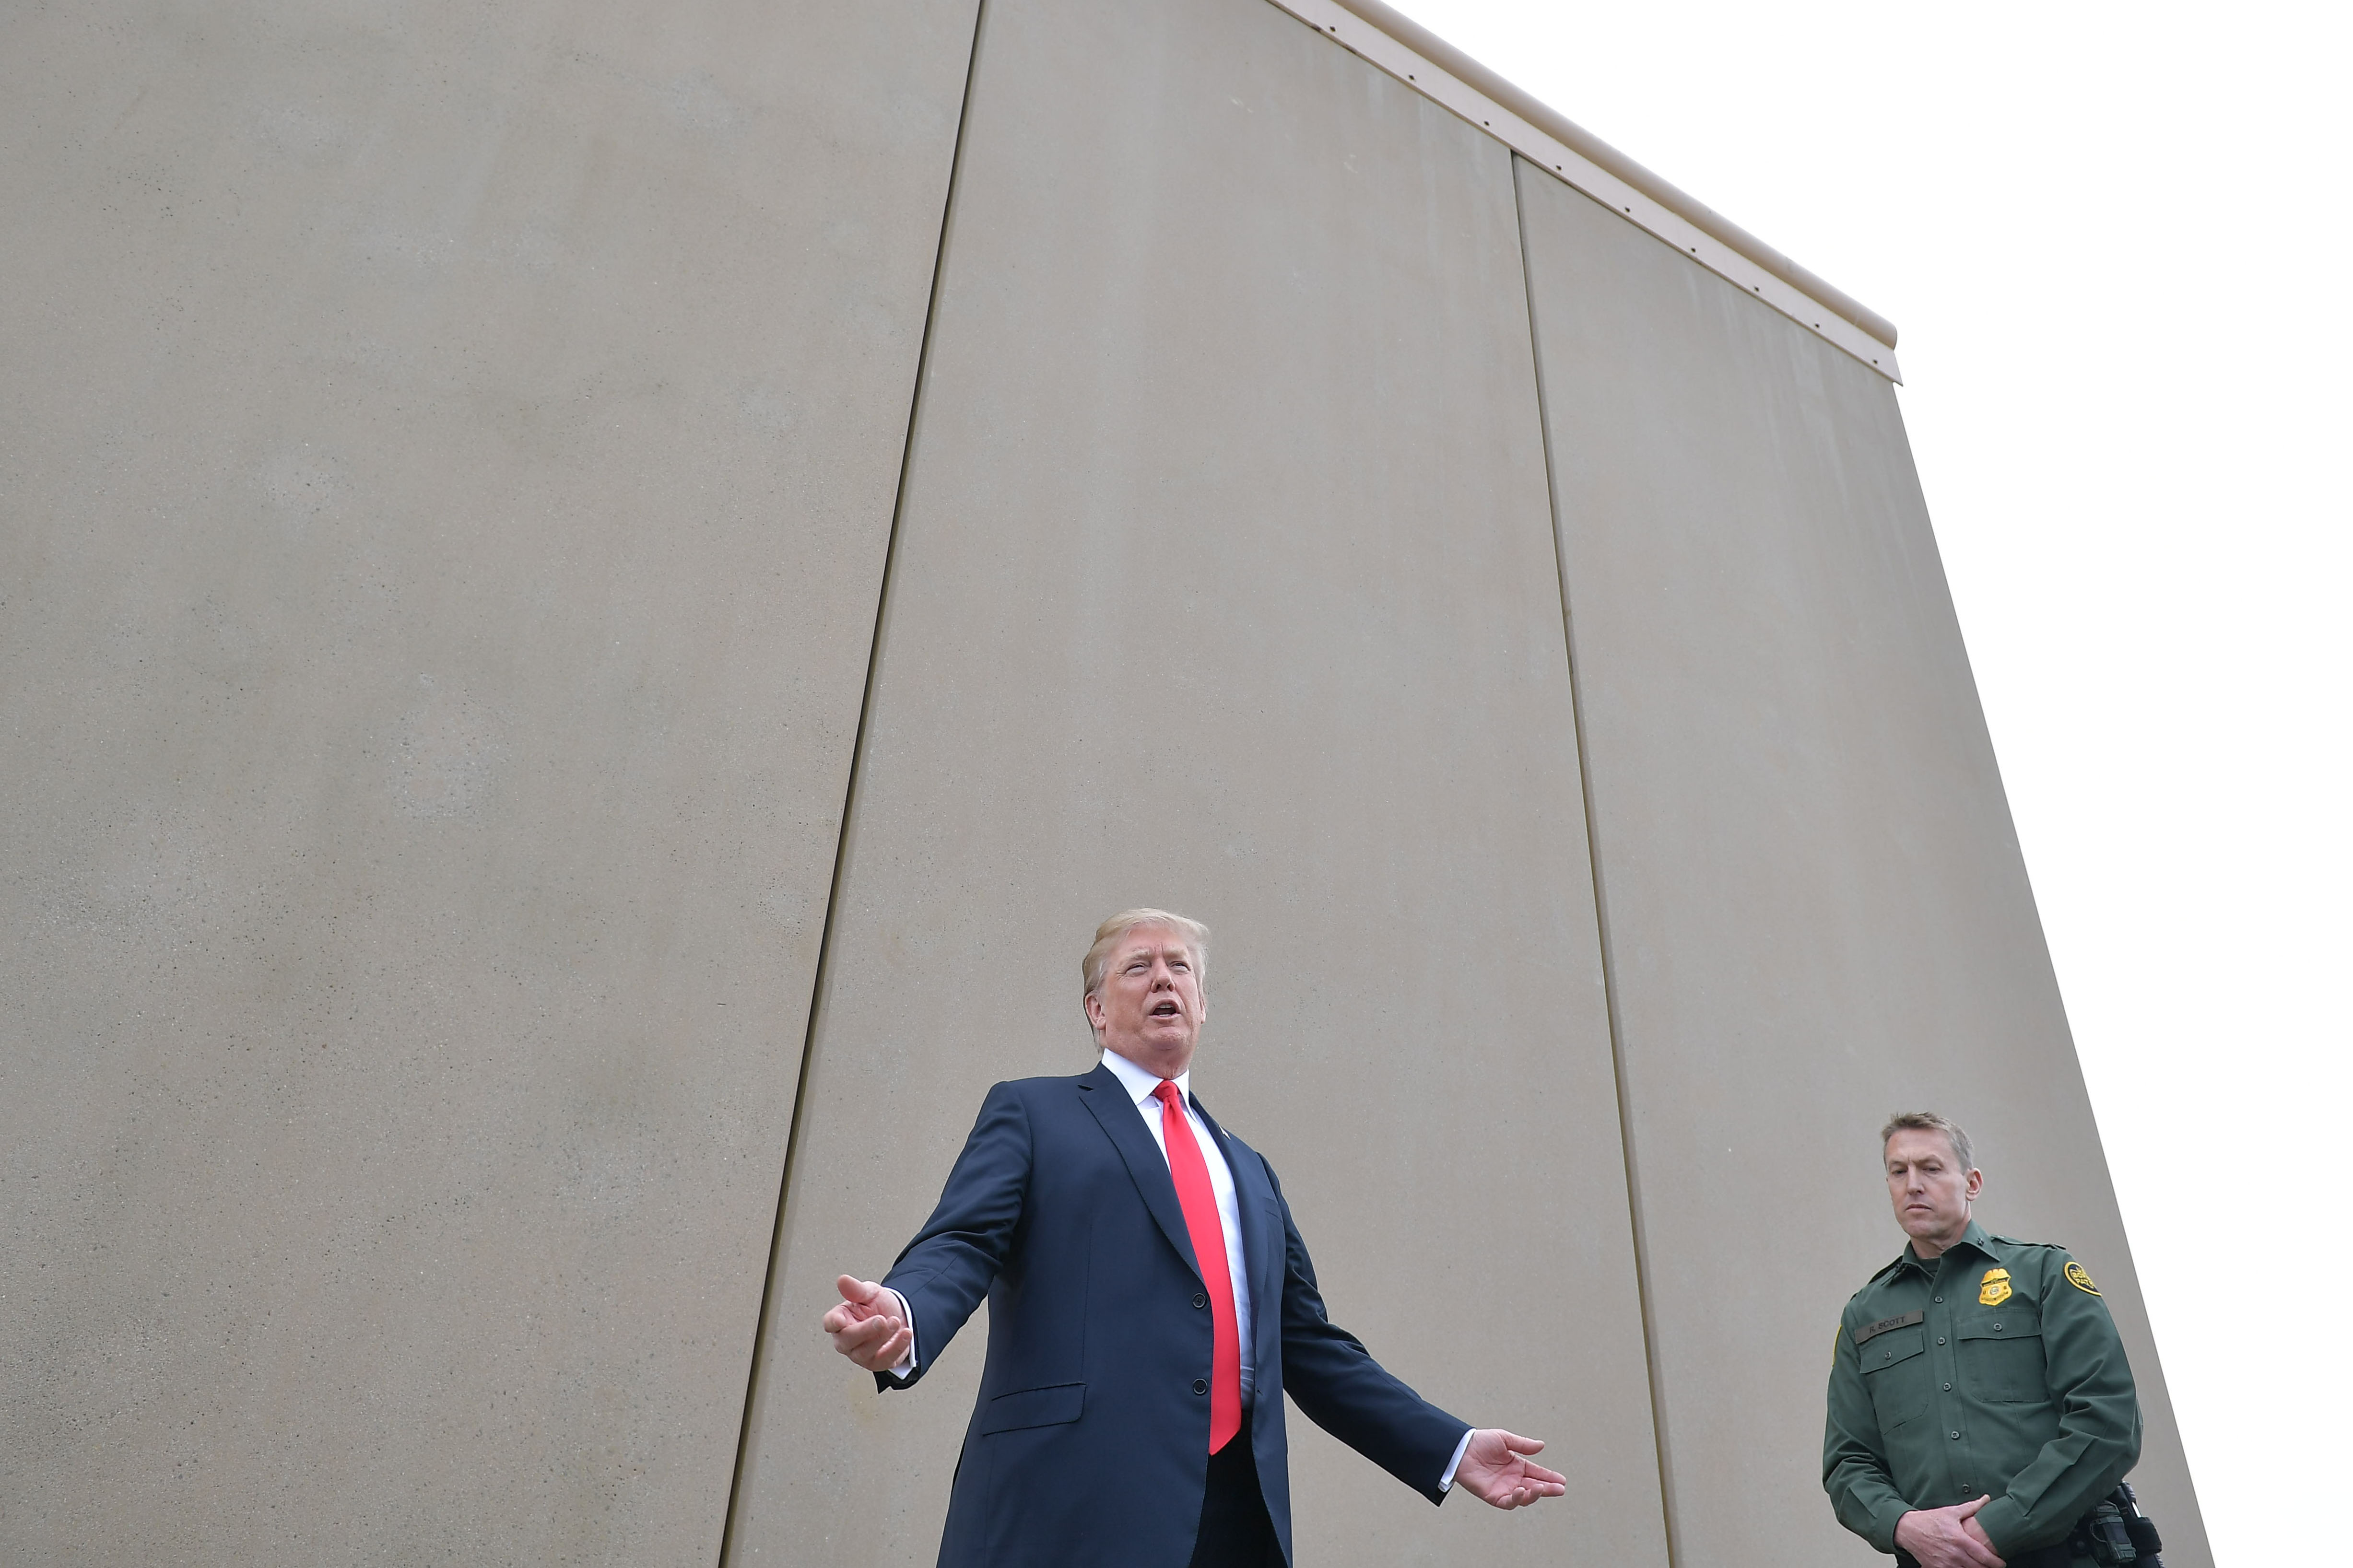 President Trump Wants To Make Immigration Key in 2020. Who Does That Help?